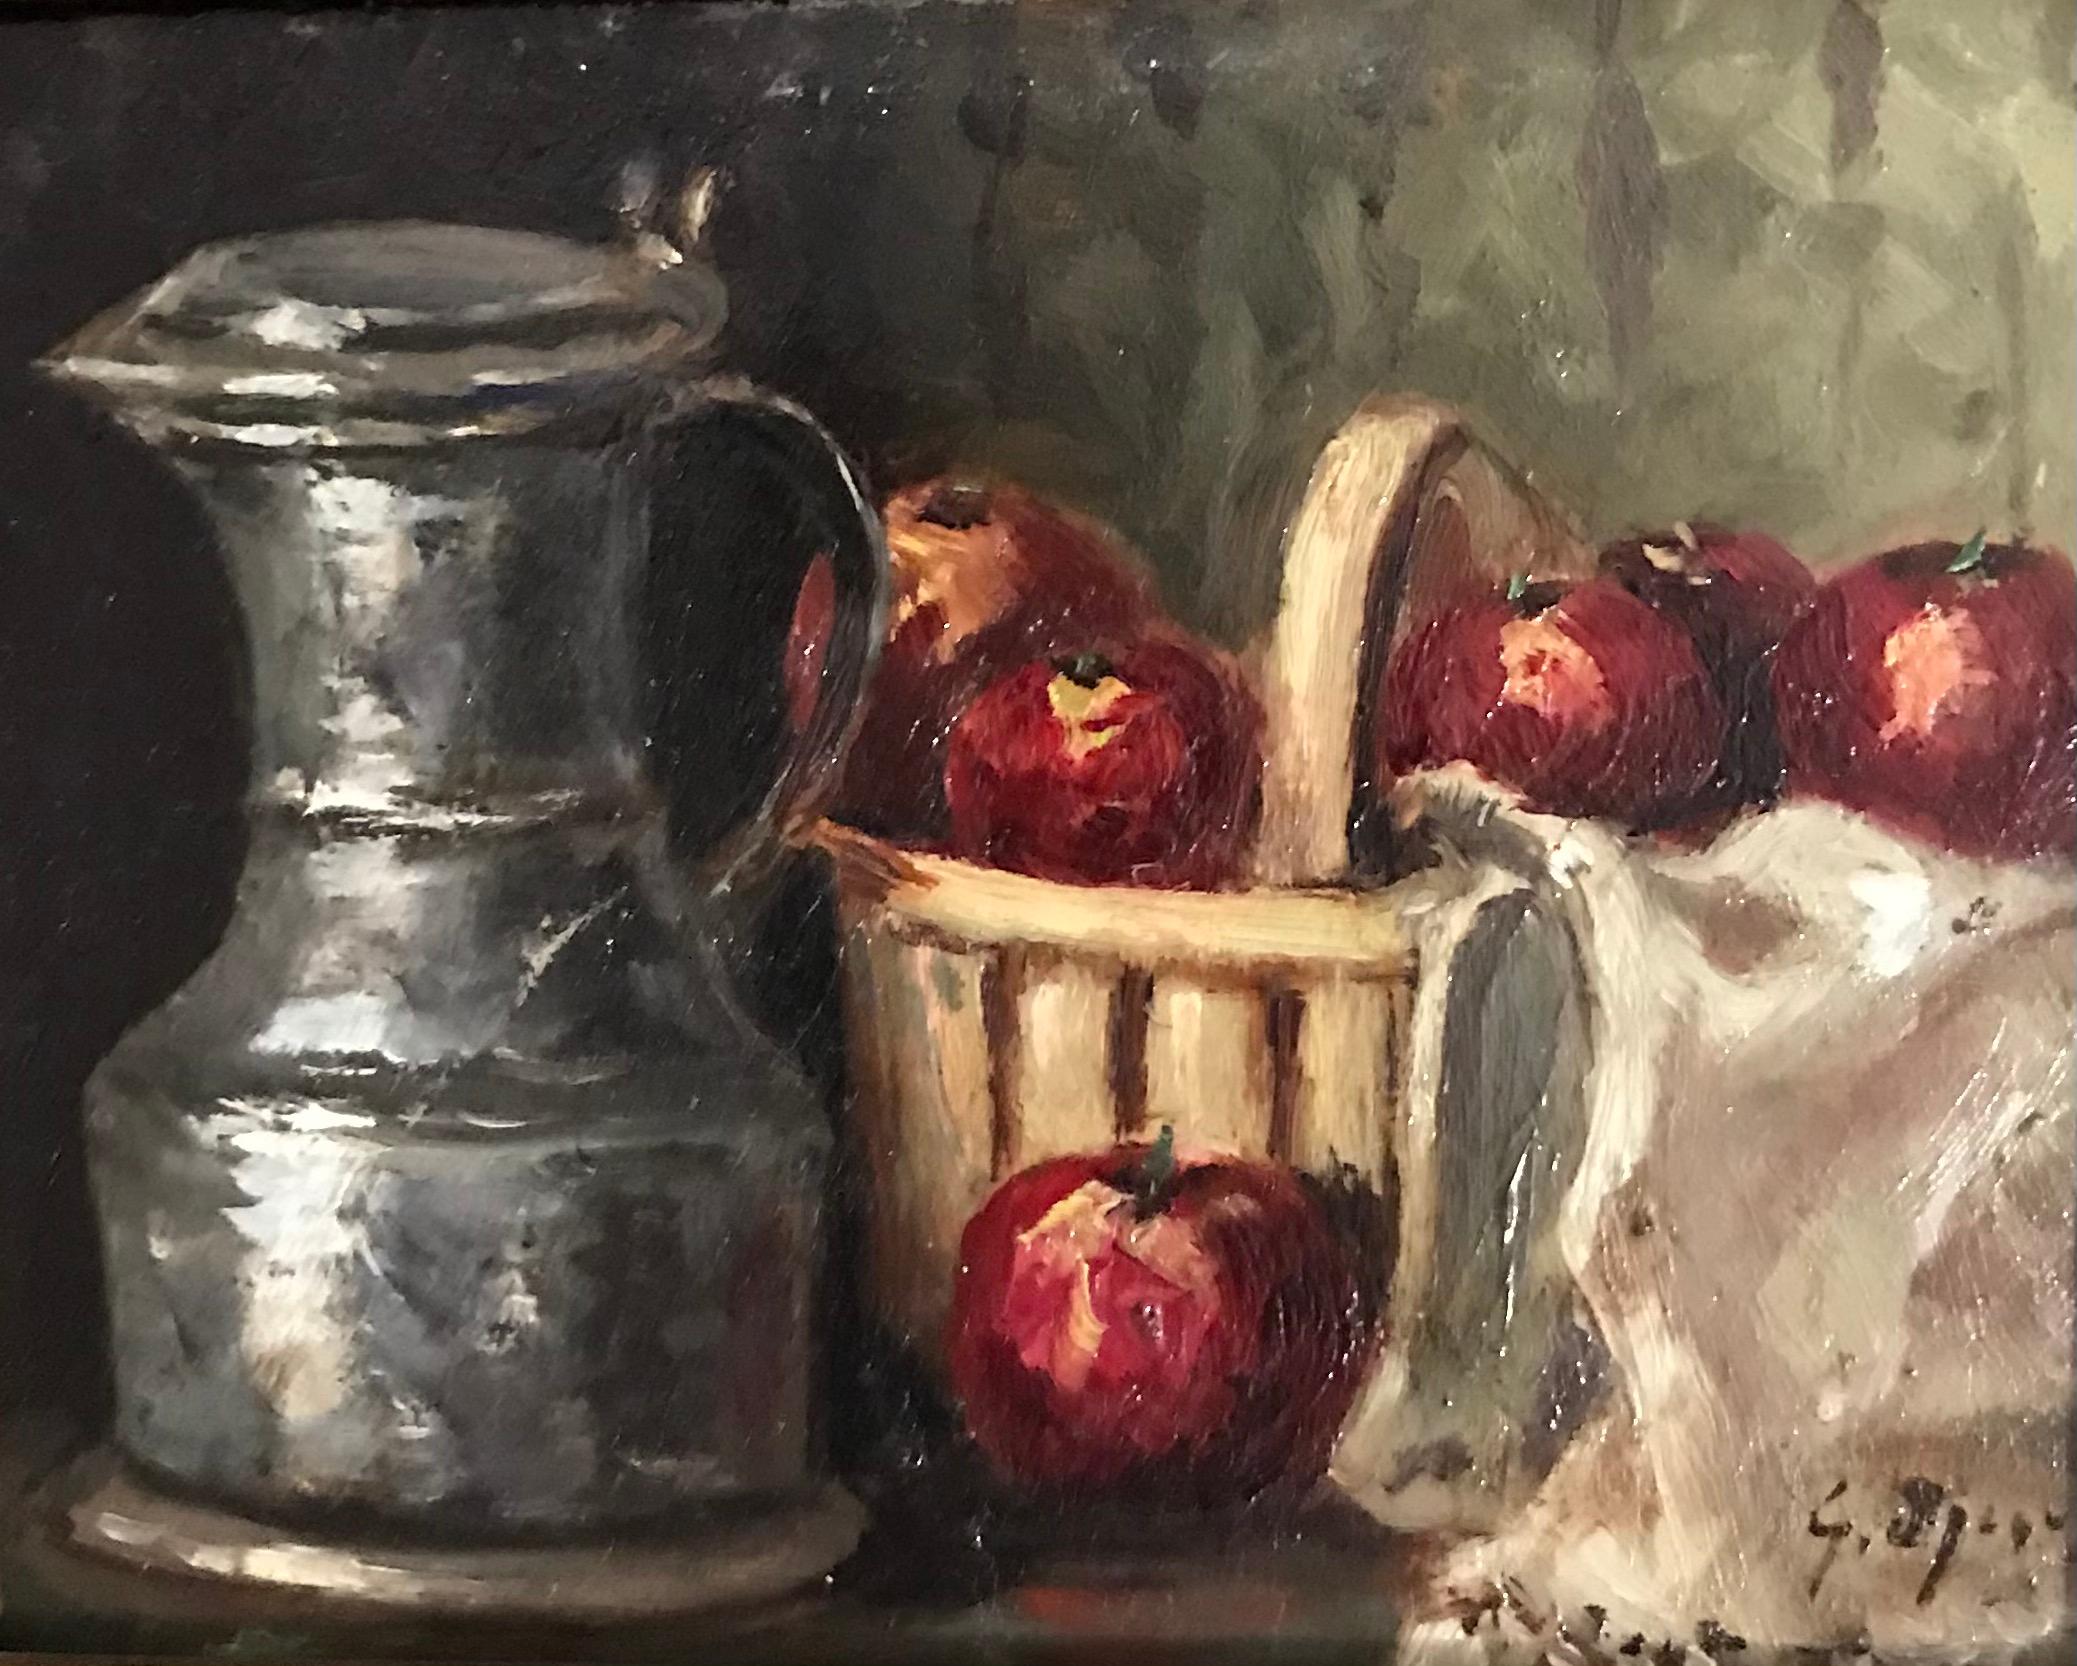 Still life with apples and channe by Georges Djakeli - Oil on wood 9x11 cm